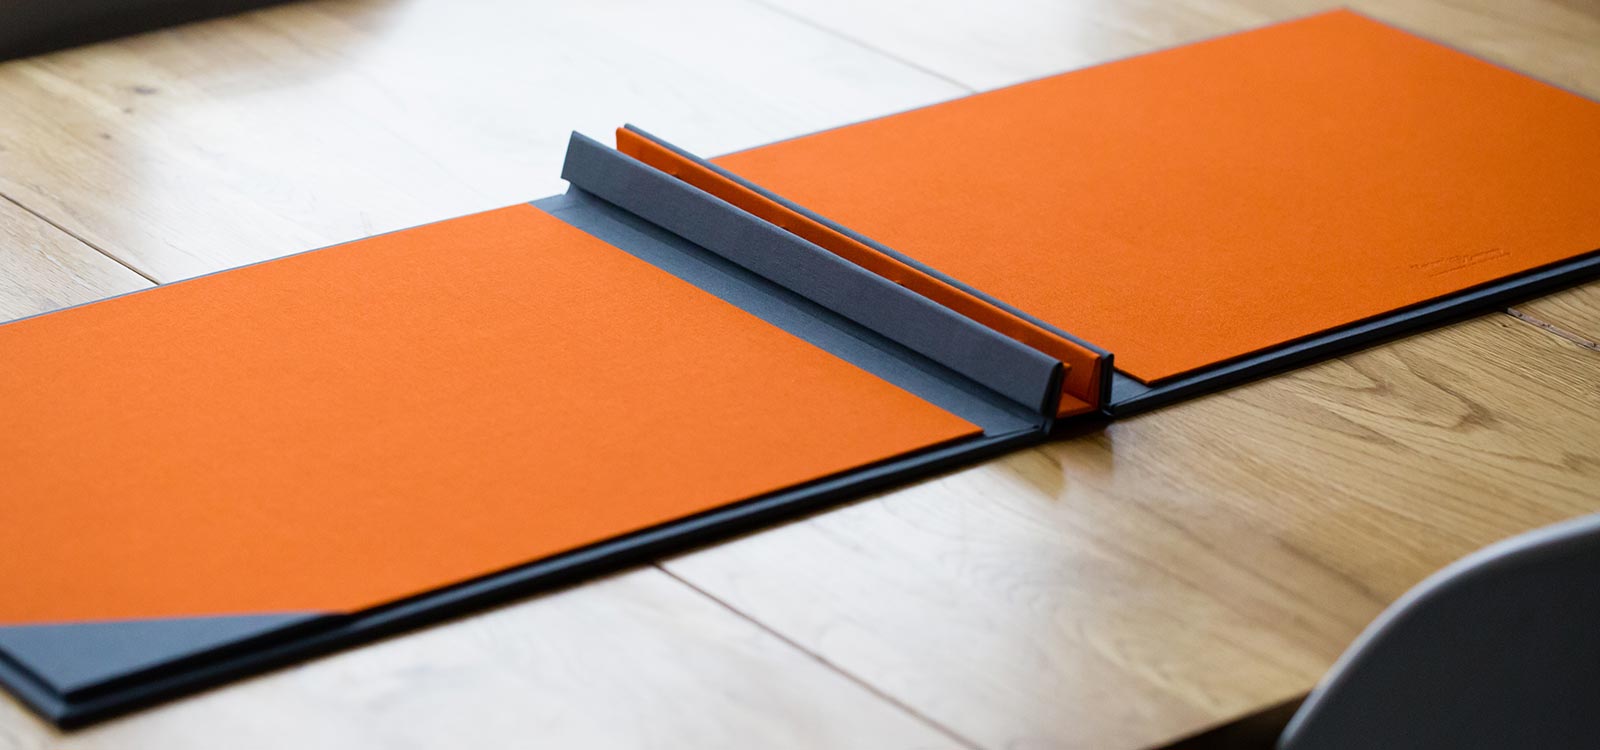 screw post portfolio book in orange and grey fabric for photographers designers and architects